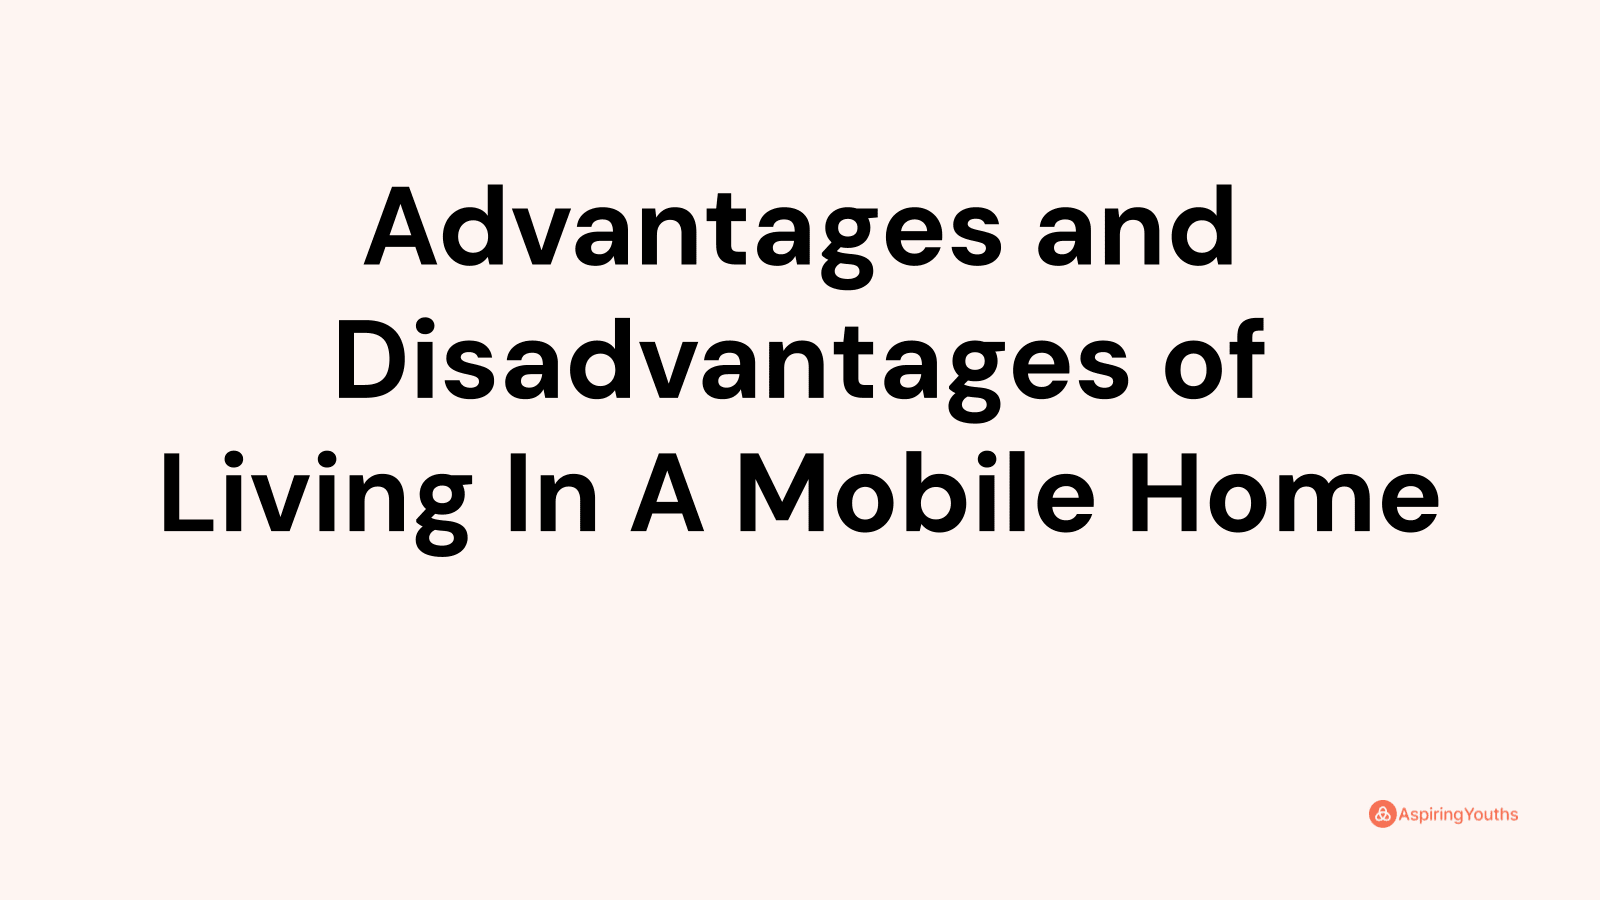 Advantages and disadvantages of Living In A Mobile Home